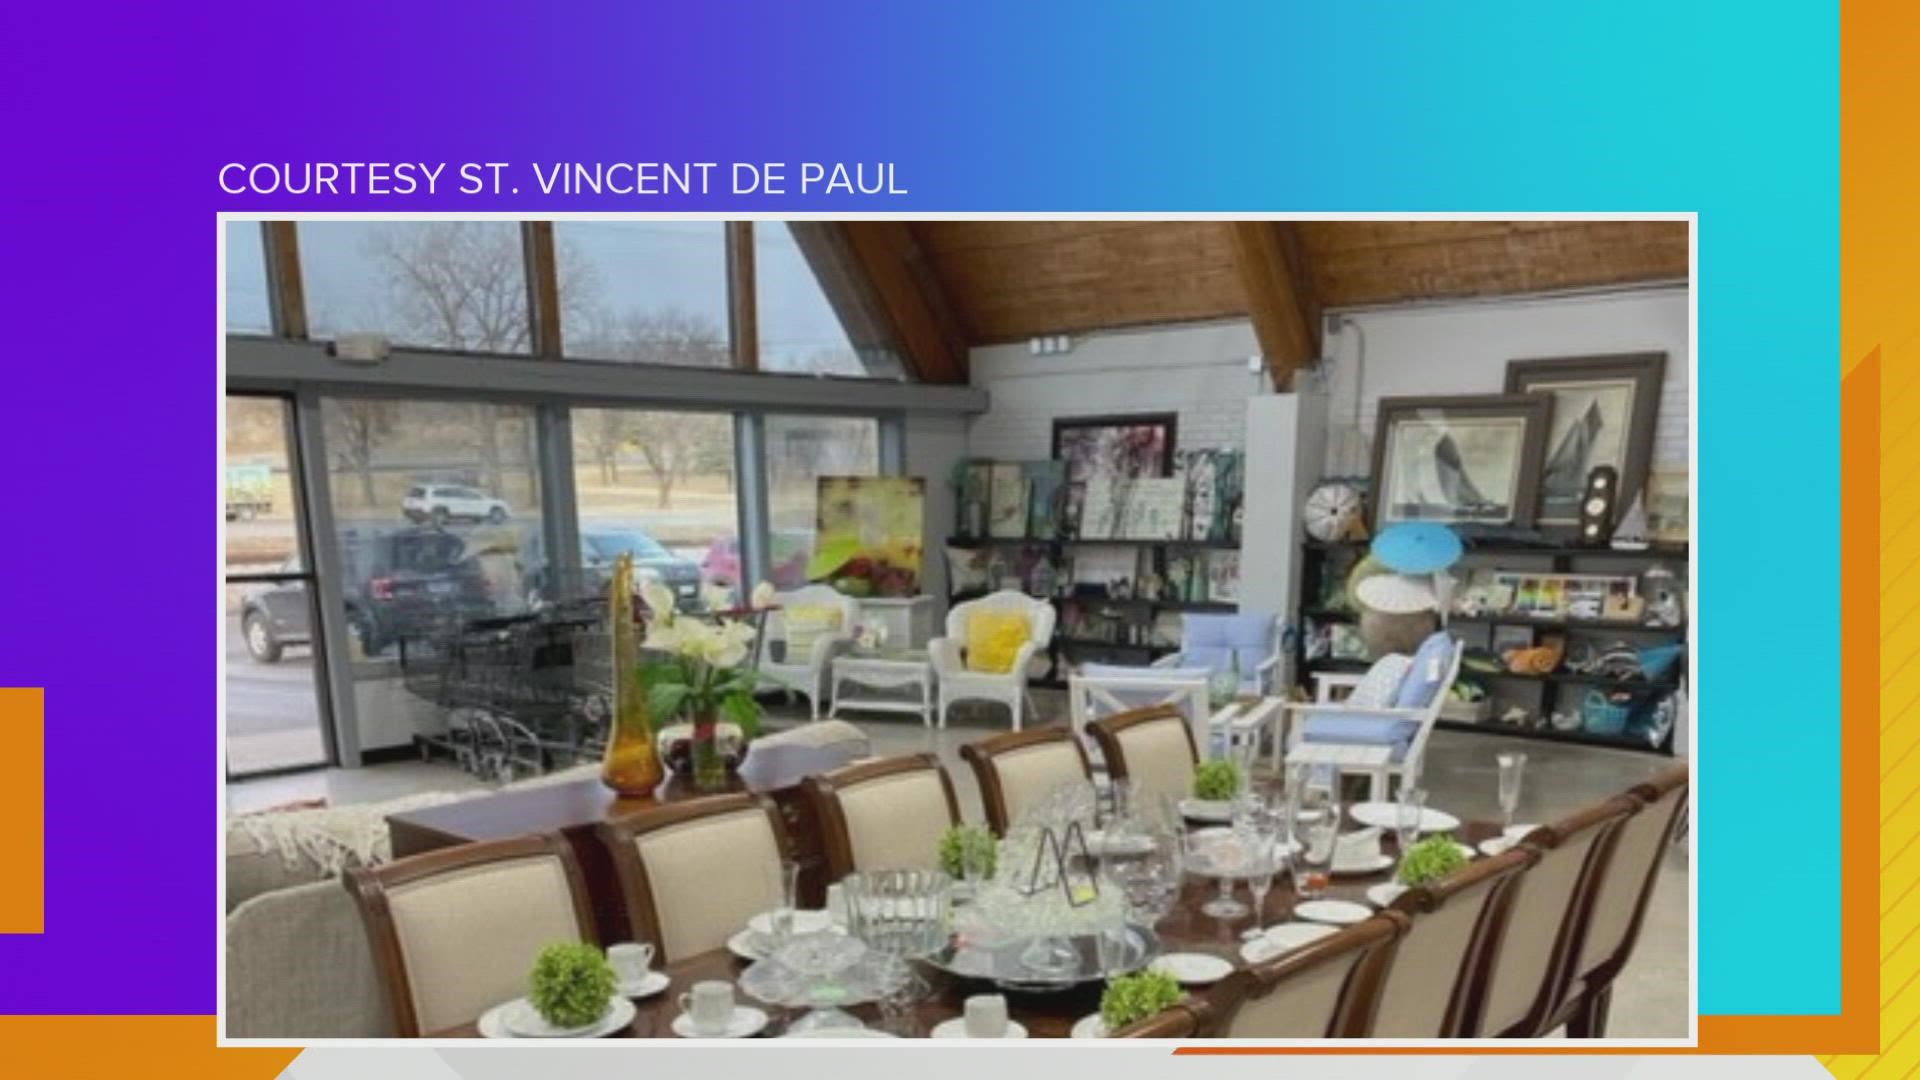 St. Vincent de Paul has opened a 3rd Thrift Store location in the "A Frame" building at 801 73rd street in Windsor Heights...Exec Director Steve Havemann has details